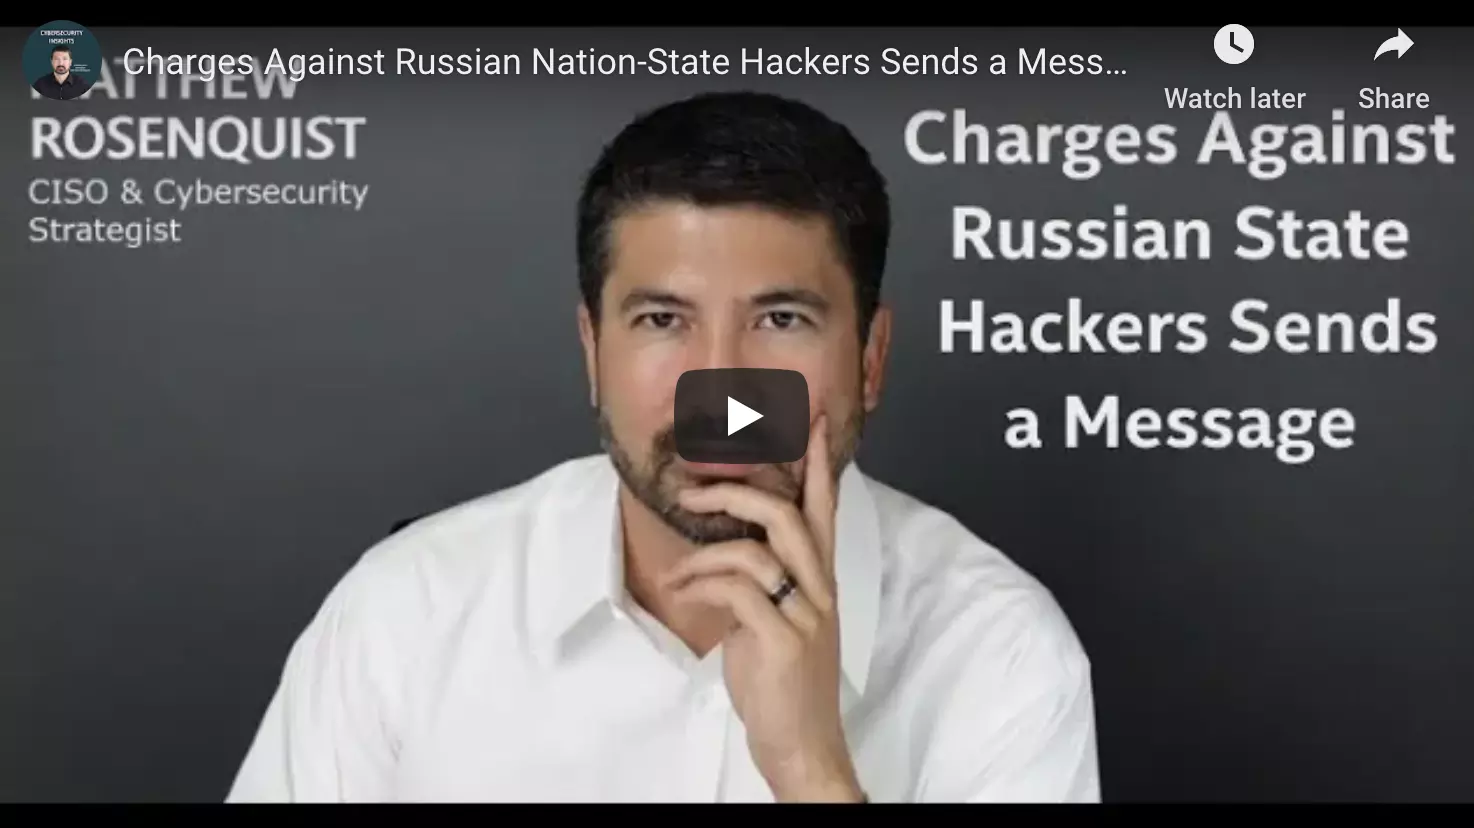 Charges_Against_Russian_Nation-State_Hackers_Sends_a_Message.png